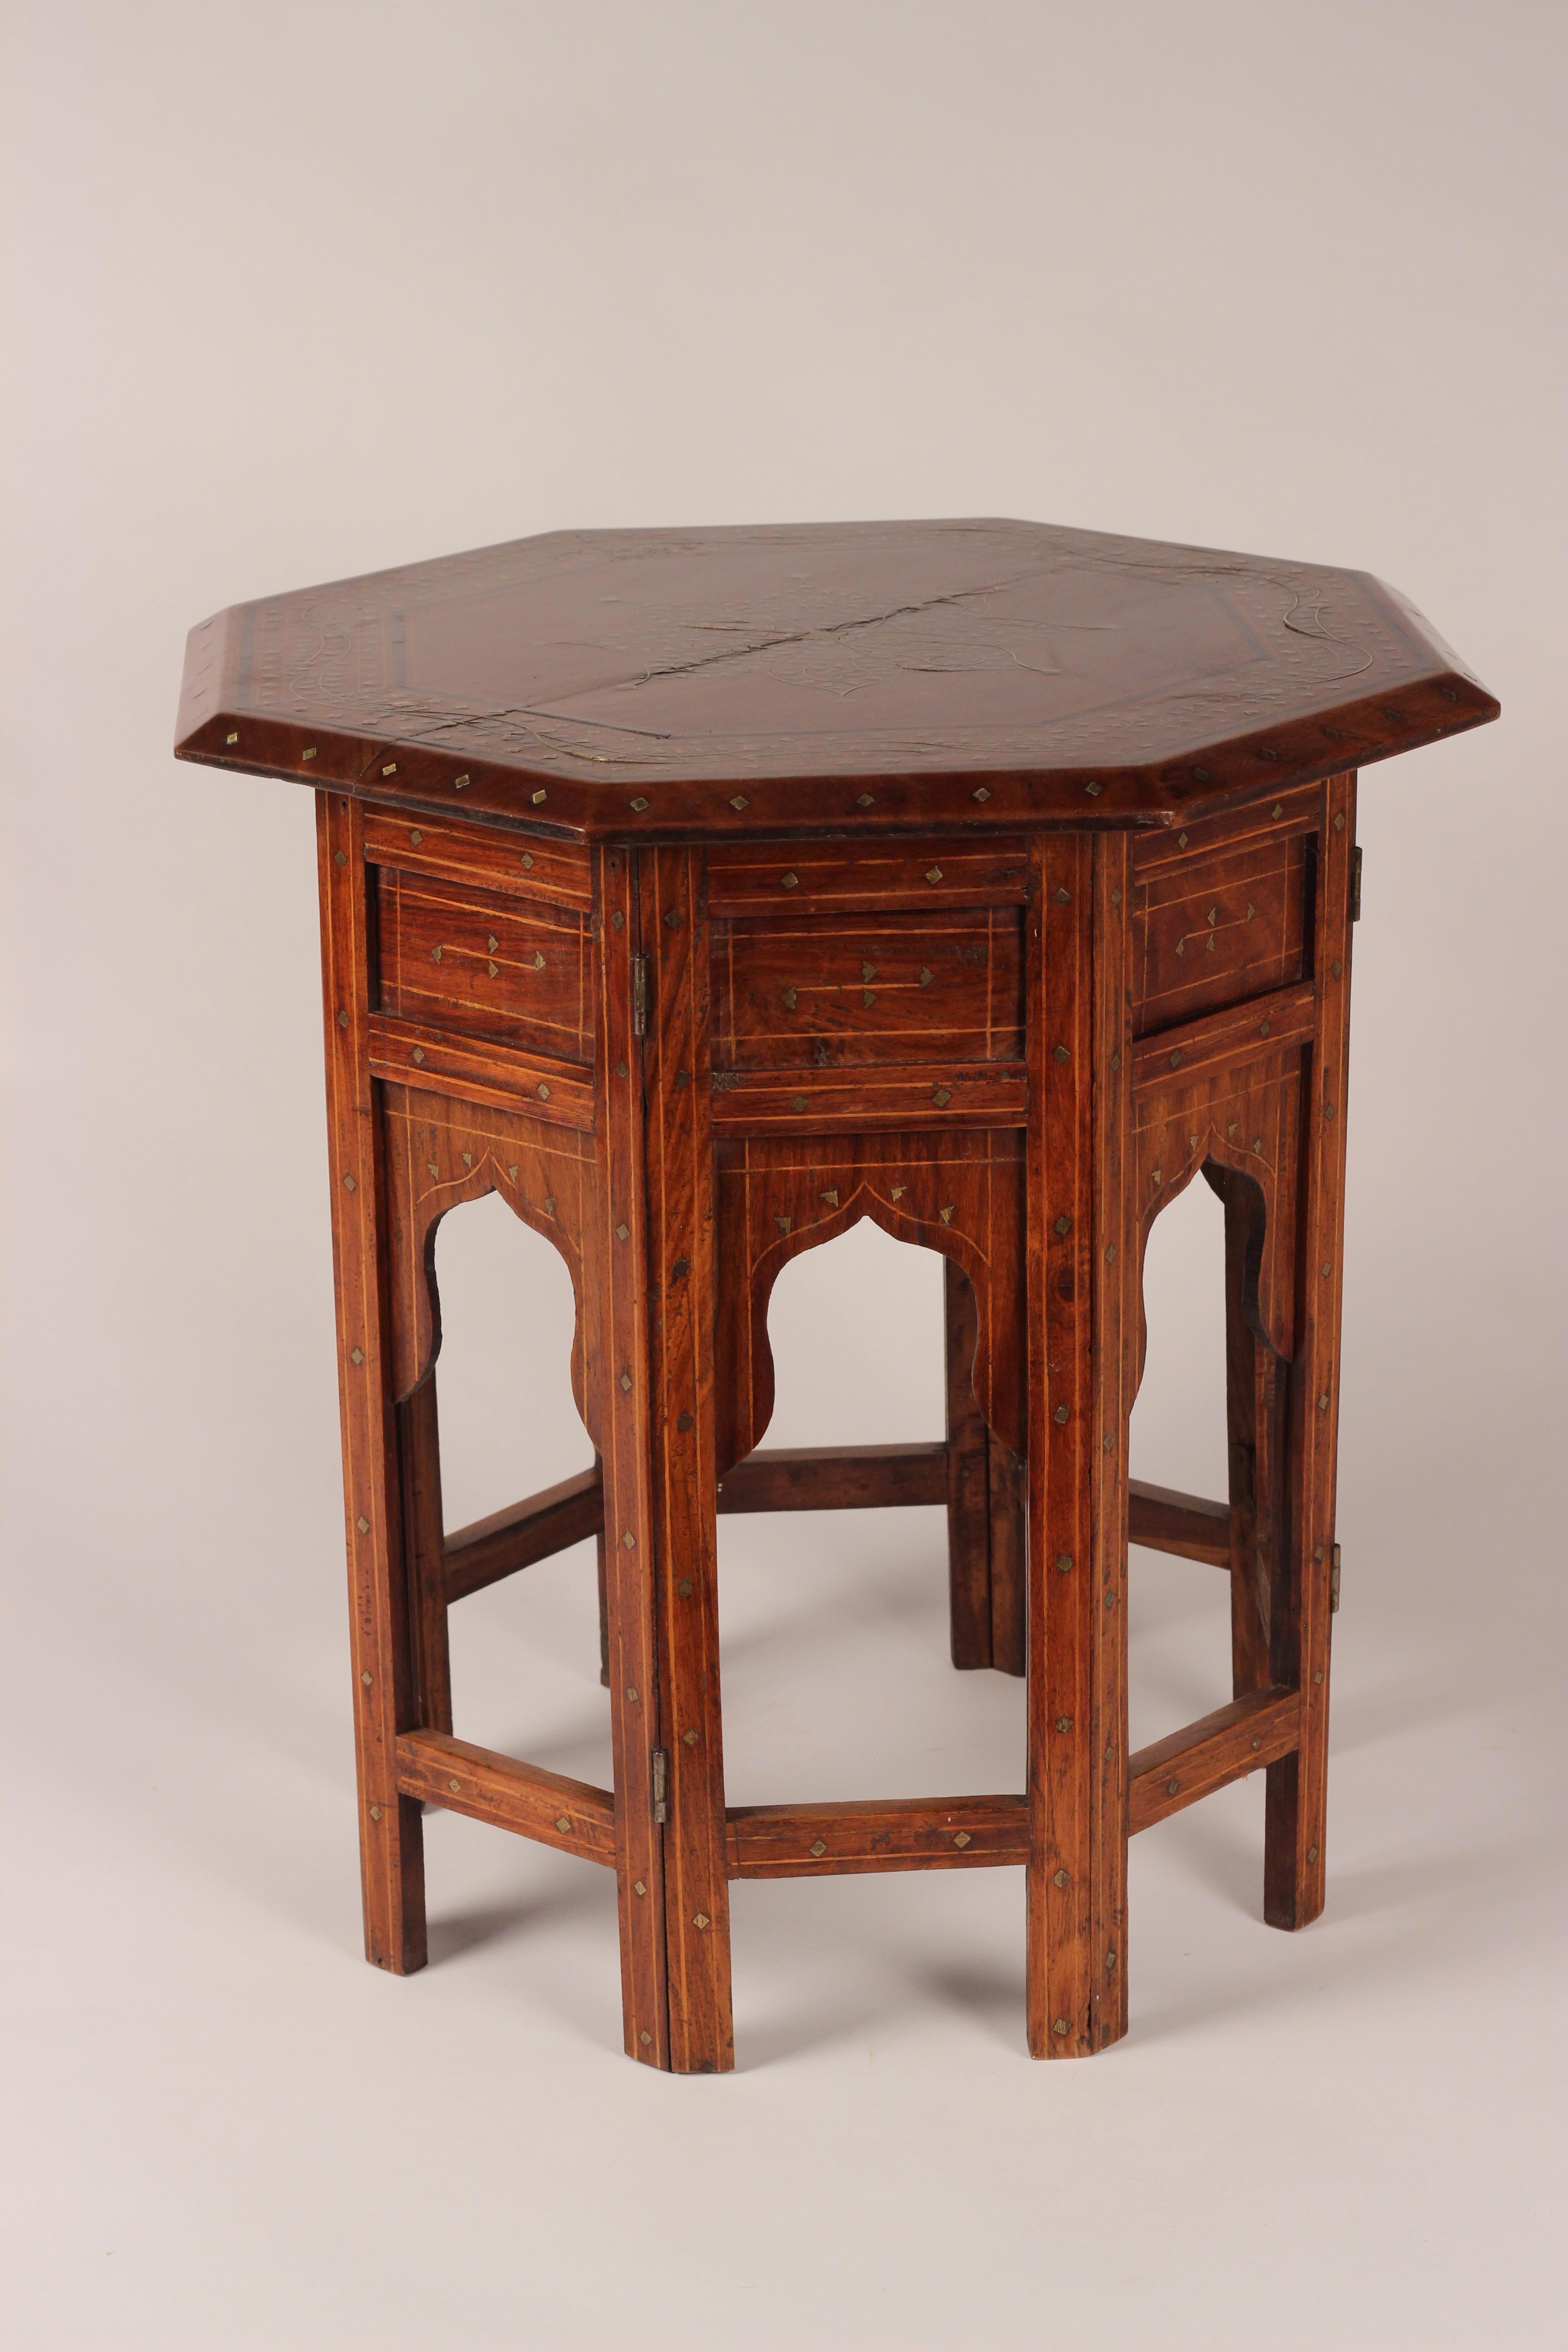 Anglo-Indian Boho Chic Style Anglo Indian Bombay Rosewood and Brass Inlay Octagonal Table For Sale